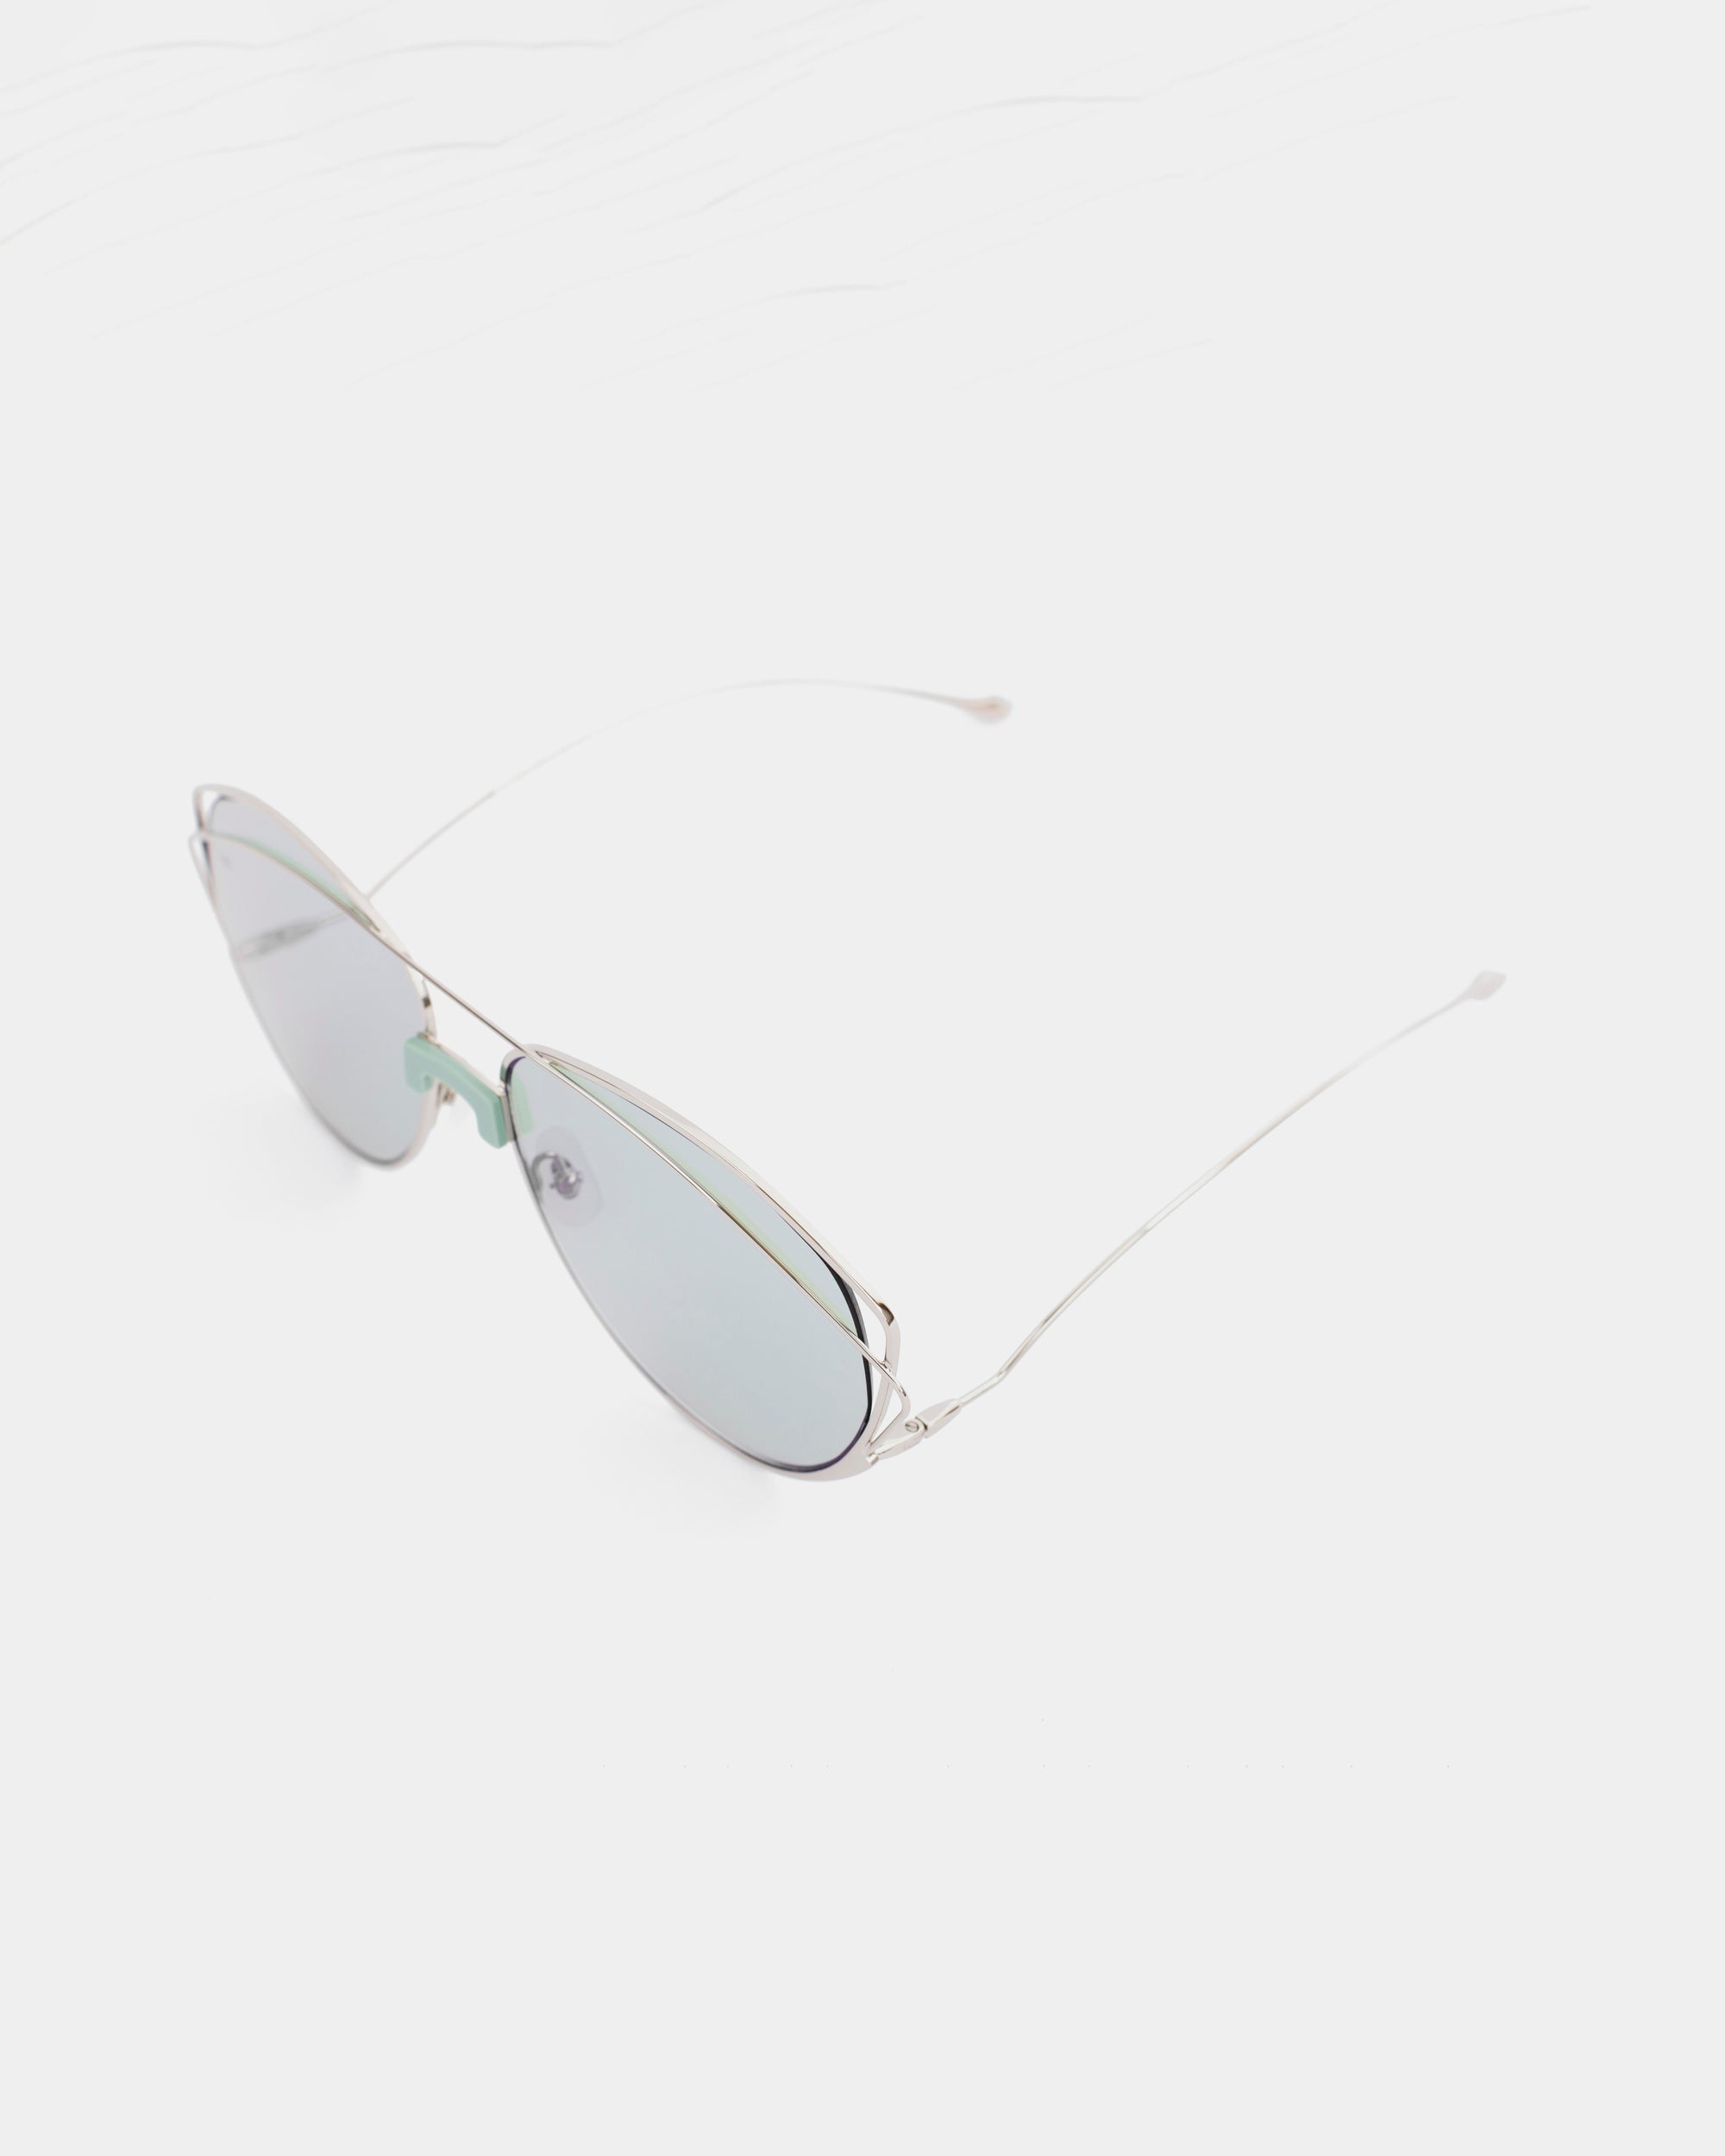 A pair of stylish, reflective Dark Eyes sunglasses from For Art&#39;s Sake® with thin stainless steel frames and lightly tinted nylon lenses offering UV protection is displayed against a plain white background. The design is minimalist and sleek.